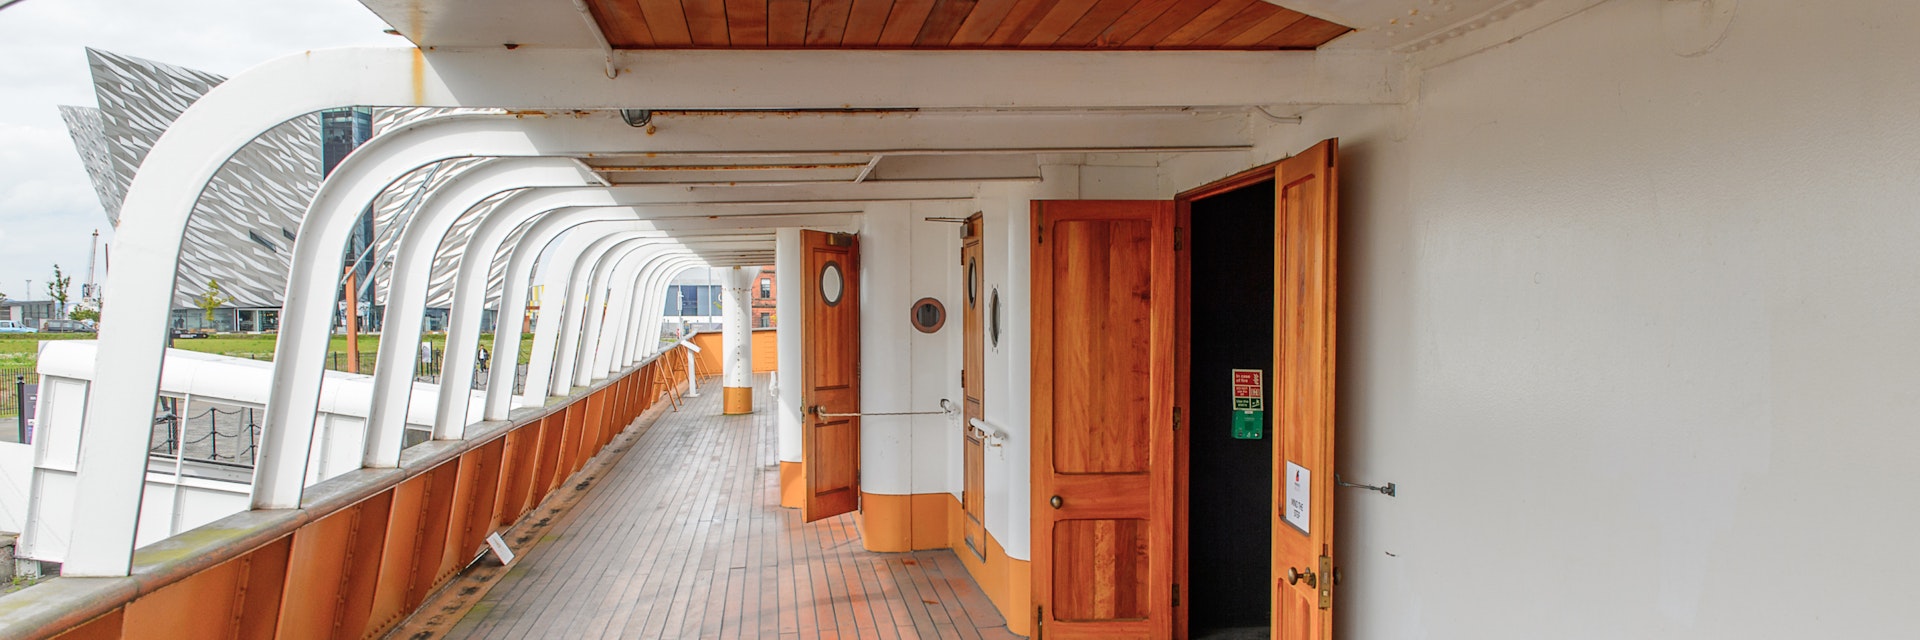 BELFAST, NI - JULY 16, 2016: Door at the SS Nomadic (1911), a steamship of the White Star Line. It was a tender to RMS Titanic on 10.04.1912; Shutterstock ID 452505922; Your name (First / Last): Lauren Gillmore; GL account no.: 56530; Netsuite department name: Online-Design; Full Product or Project name including edition: 65050/ Online Design /LaurenGillmore/POI